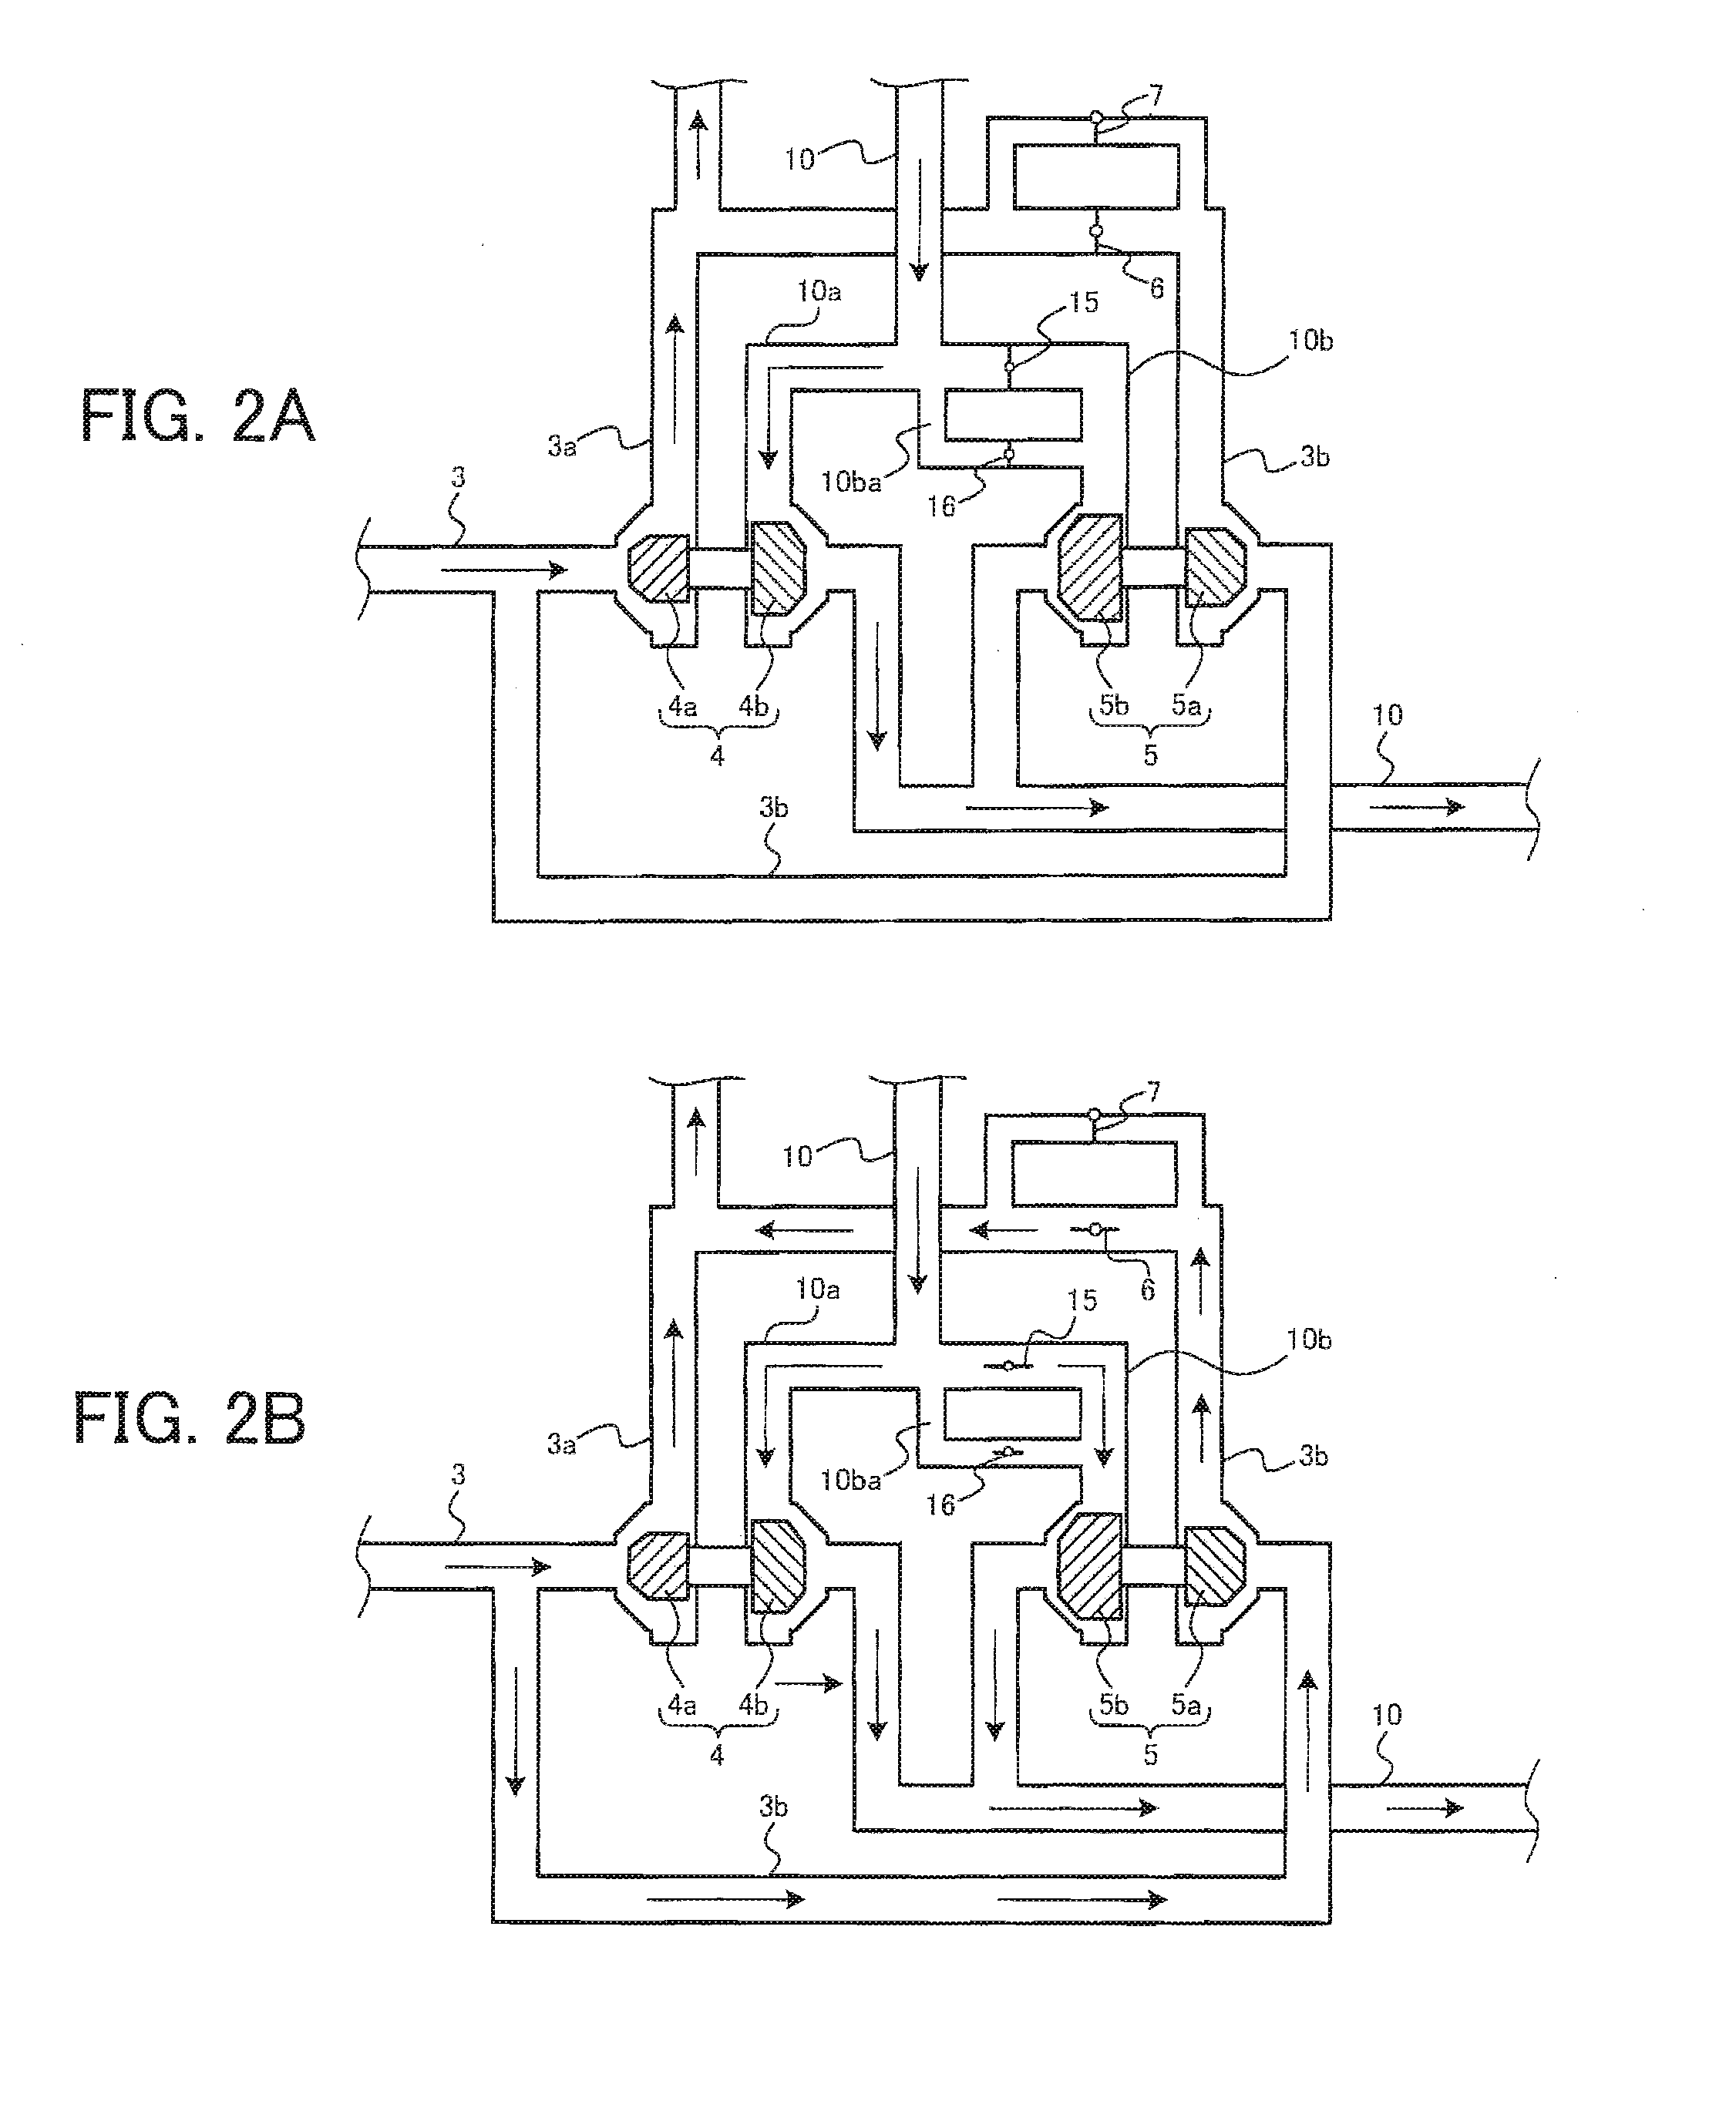 Supercharger control device for an internal combustion engine